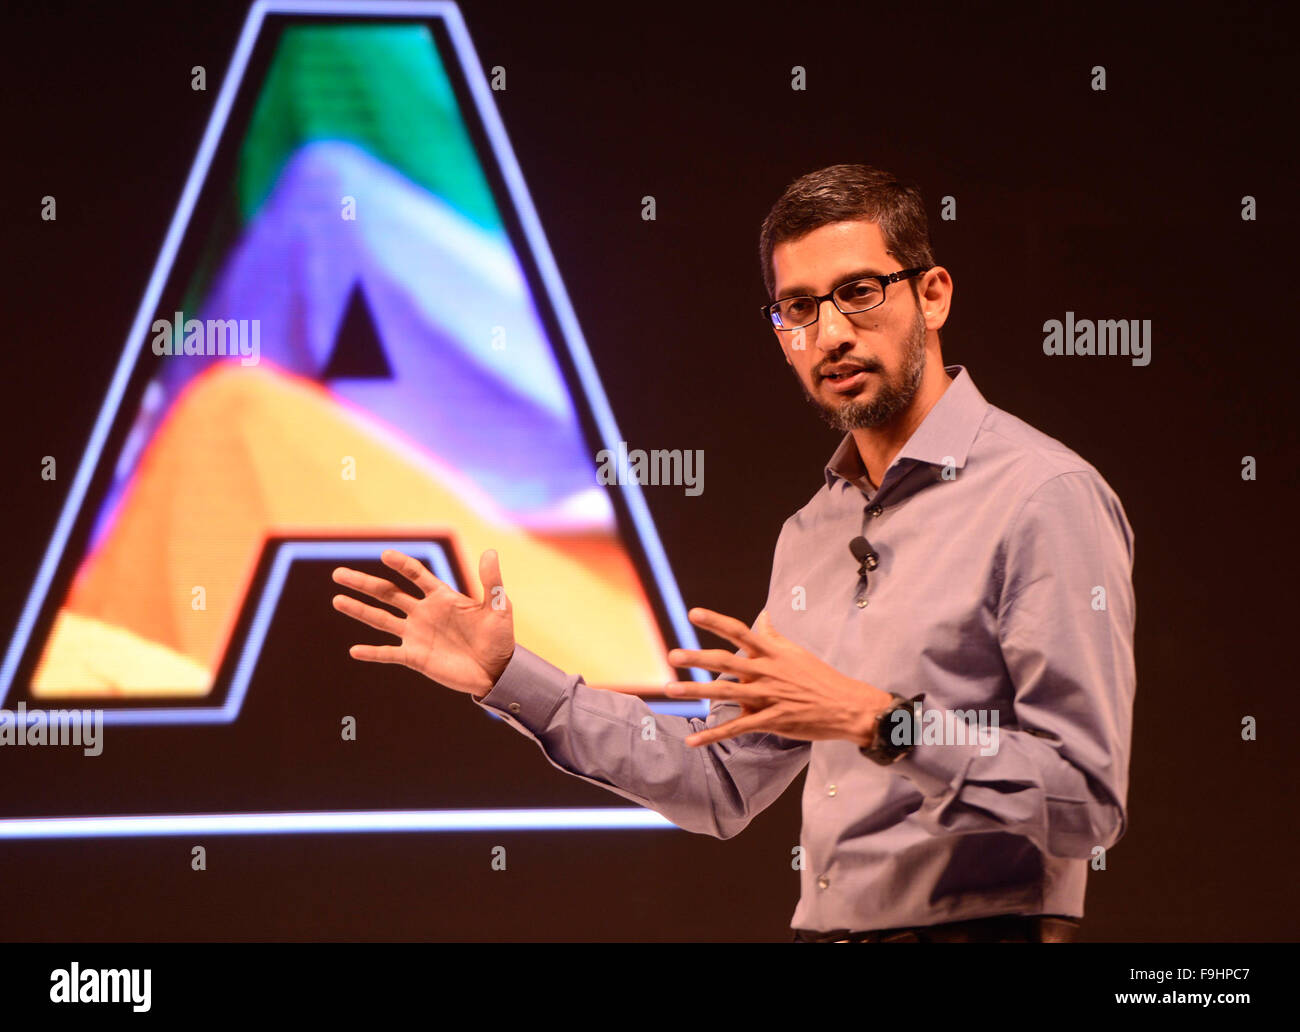 New Delhi, India. 16th Dec, 2015. Chief Executive Officer of Google Inc. Sundar Pichai speaks at a news conference in New Delhi, India, Dec. 16, 2015. Sundar Pichai on Wednesday announced the company's plans to expand products and services in India. © Stringer/Xinhua/Alamy Live News Stock Photo